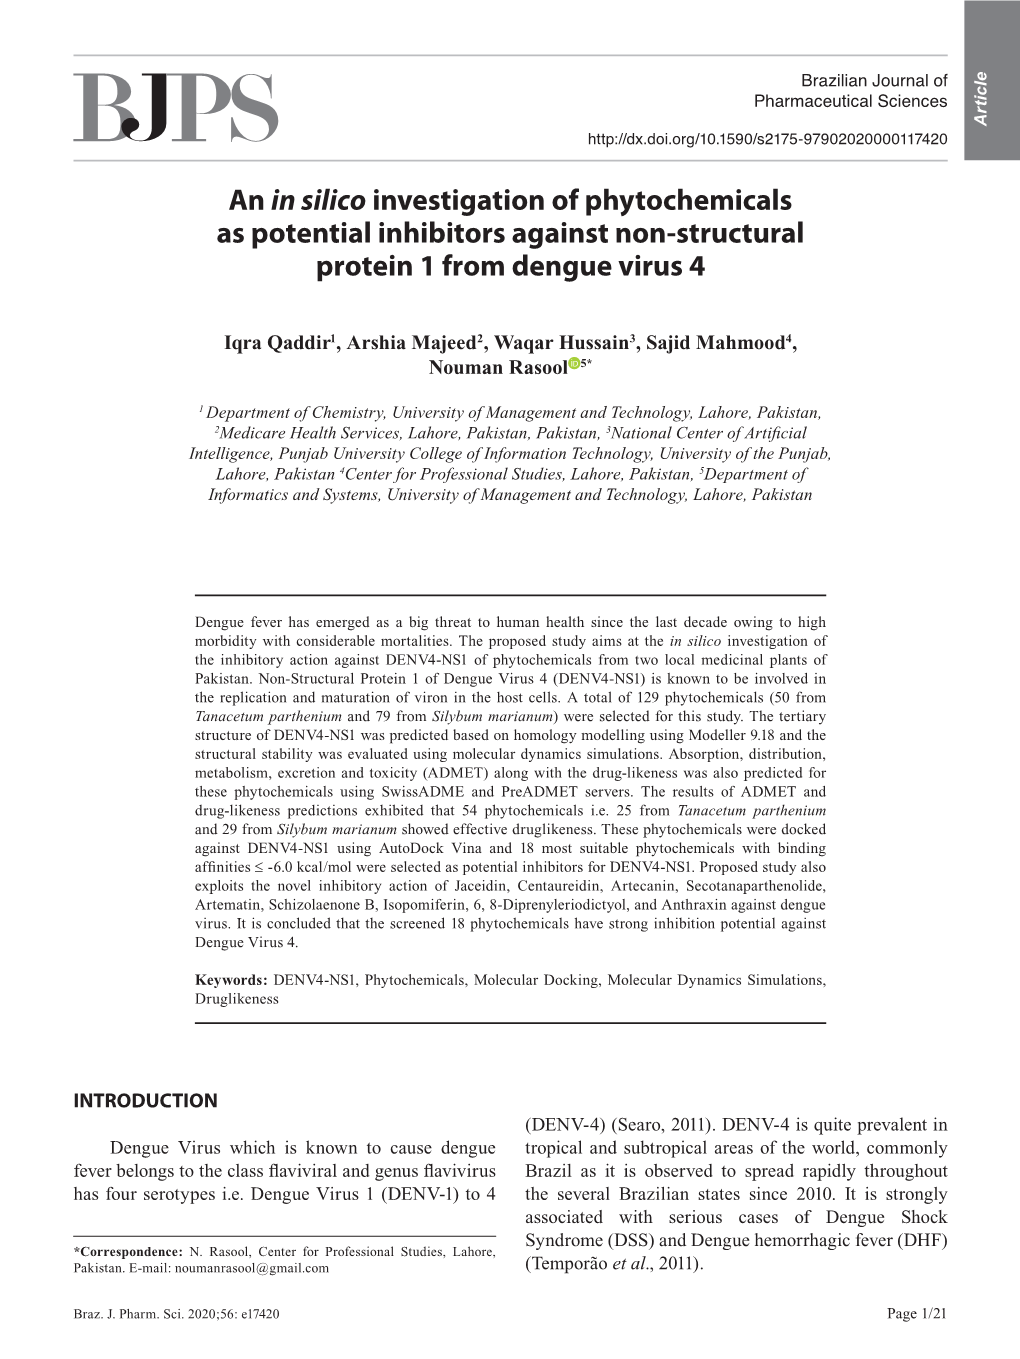 An in Silico Investigation of Phytochemicals As Potential Inhibitors Against Non-Structural Protein 1 from Dengue Virus 4